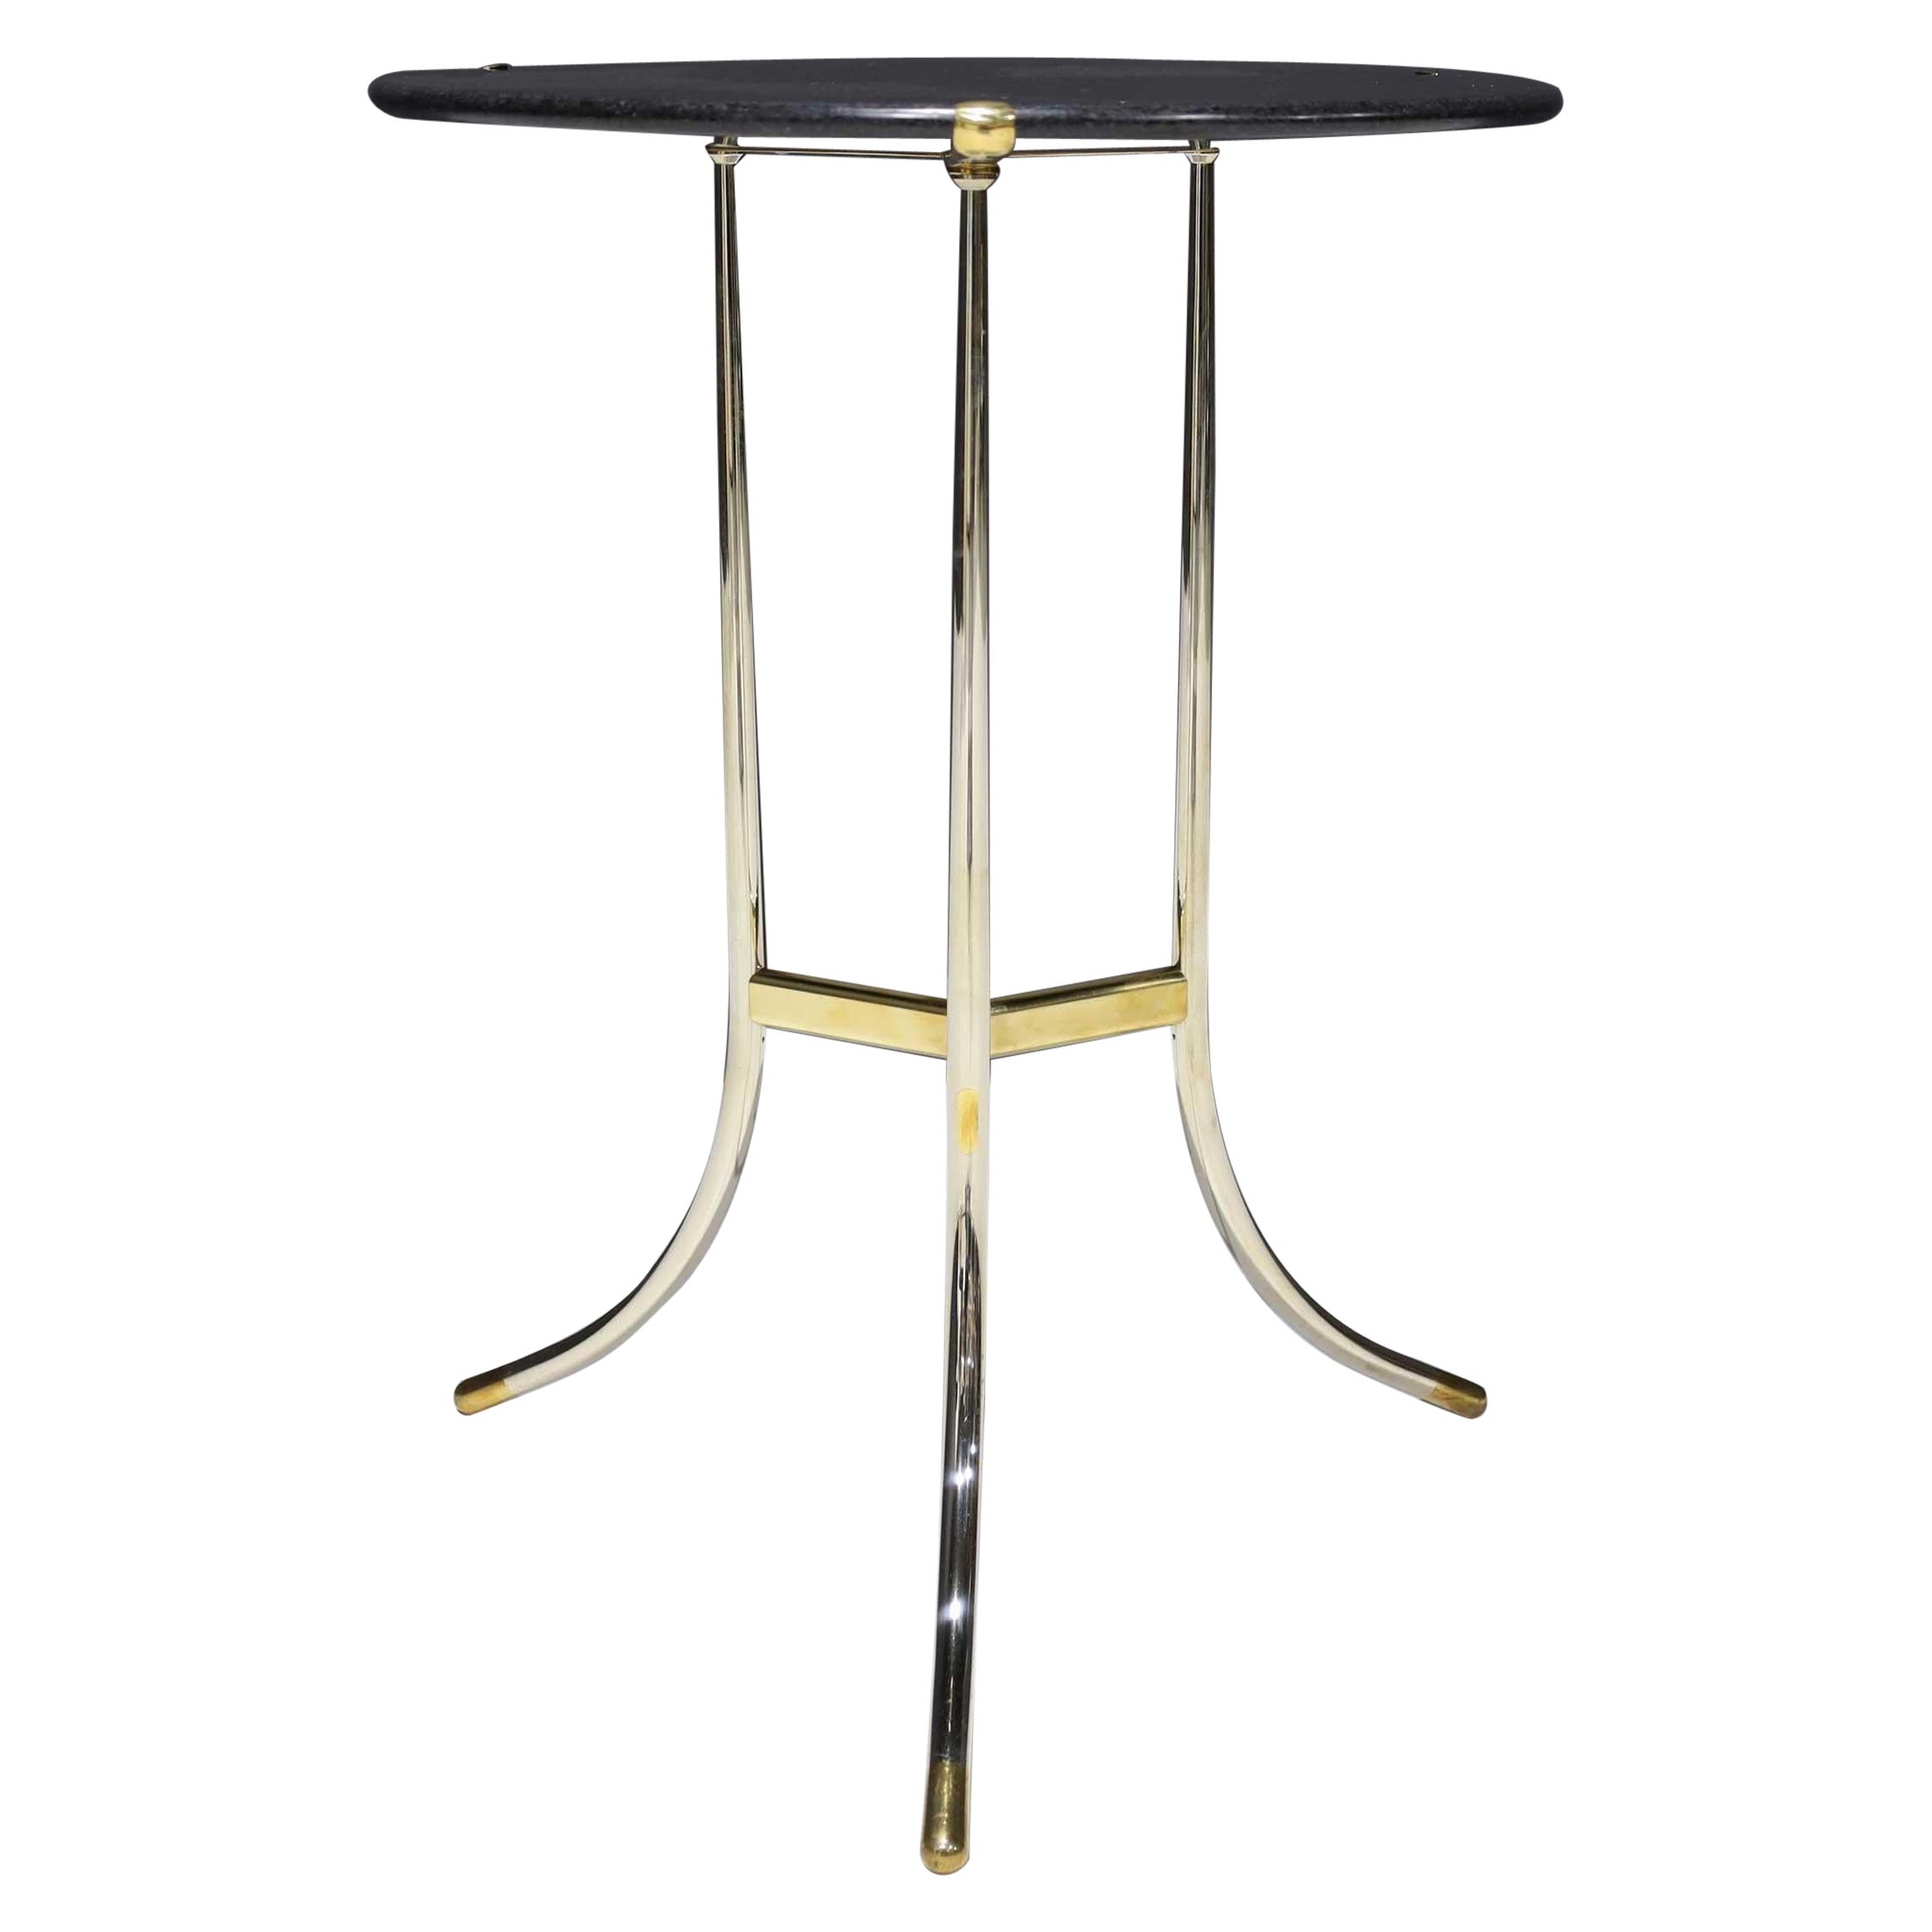 Cedric Hartman Polished Steel and Brass Side Table with Black Granite Top For Sale